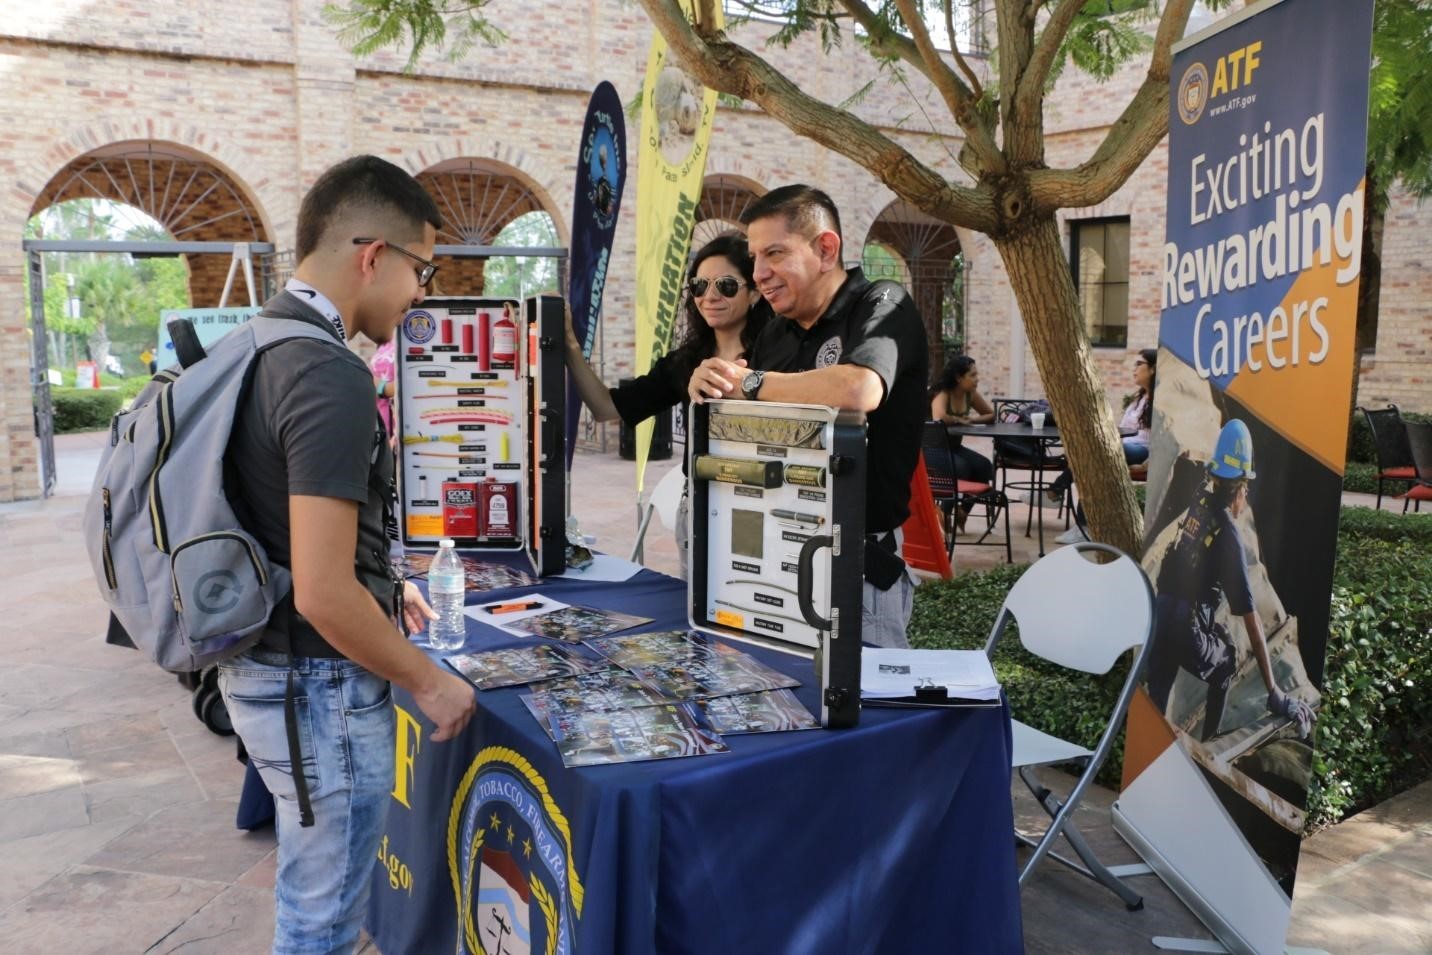 Industry Operations Investigator Edward working a recruiting booth at a local community college.